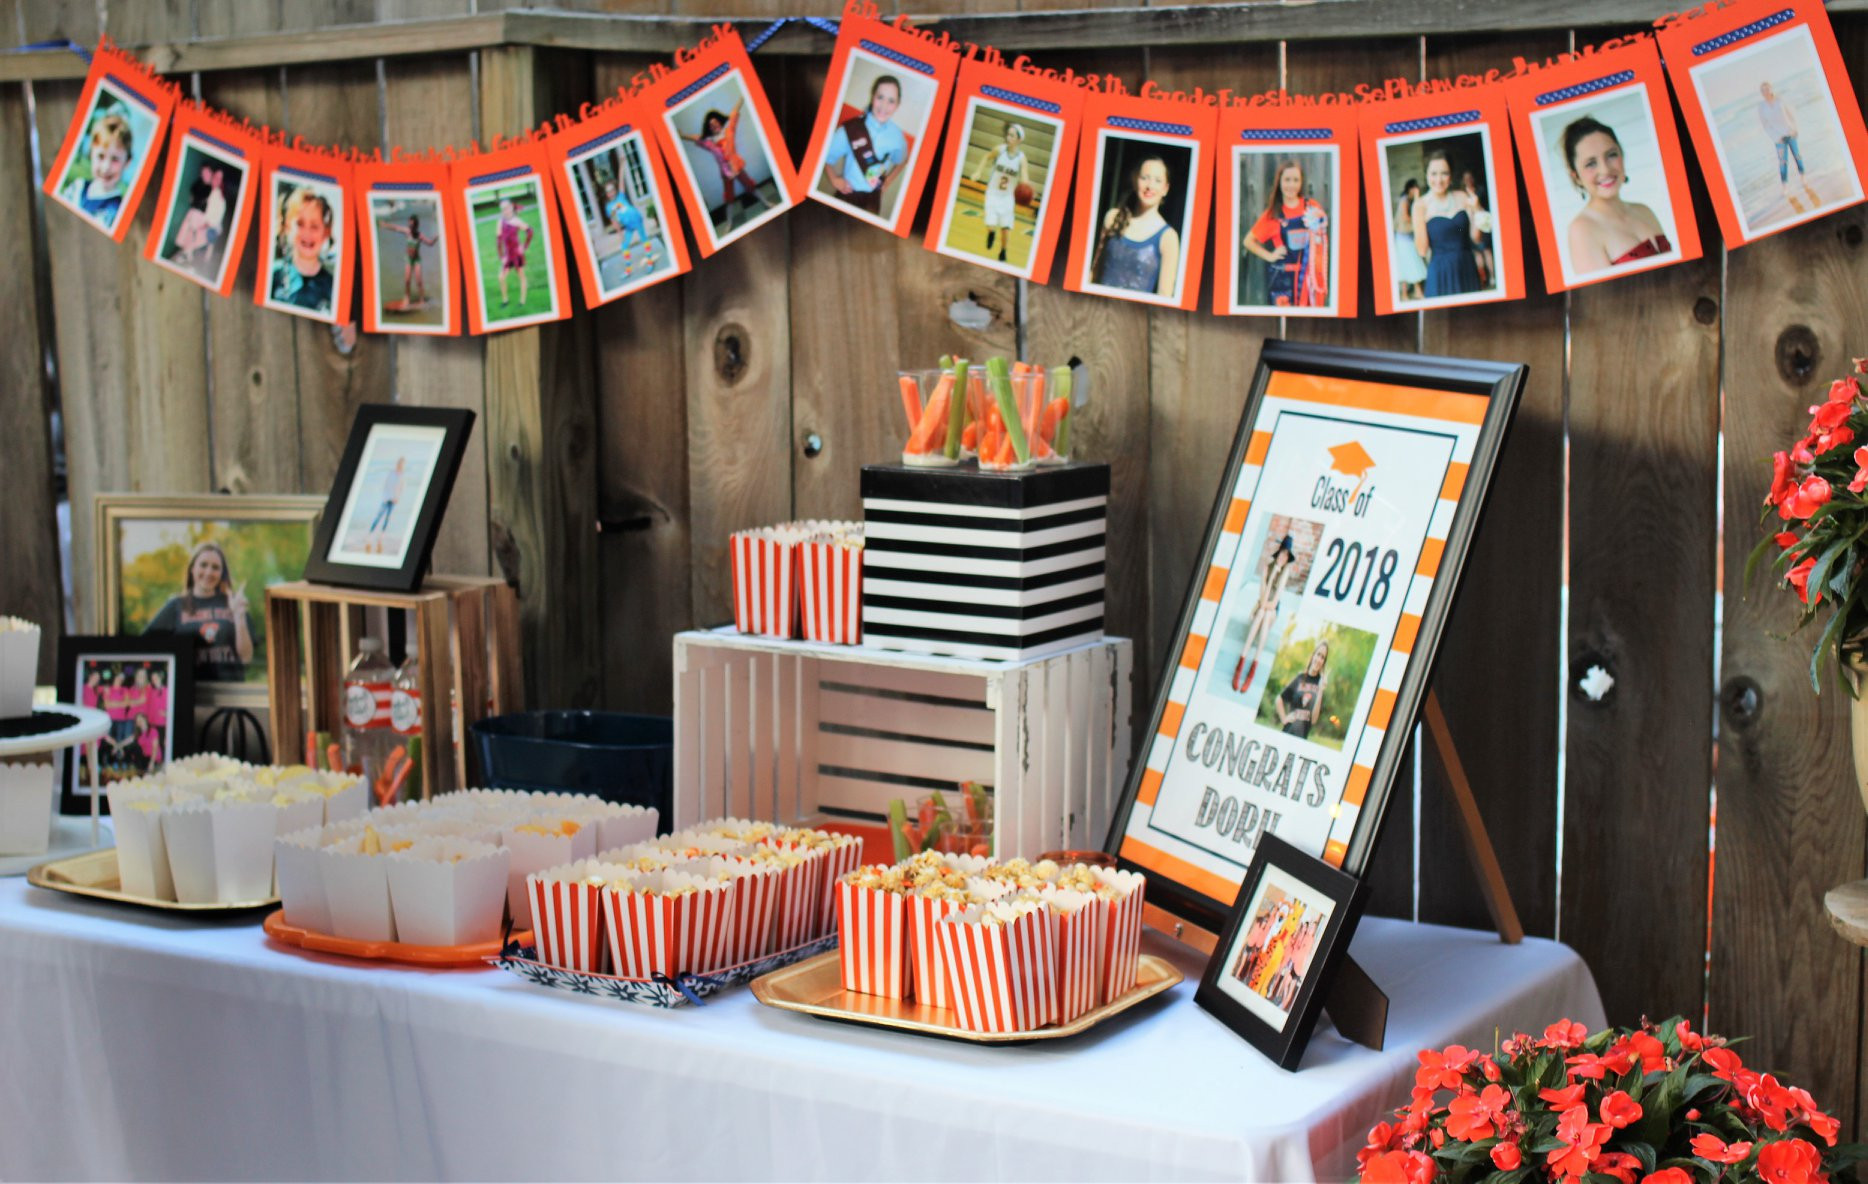 Graduation Party Ideas
 Graduation Party Ideas How to Celebrate Your Senior s Big Day